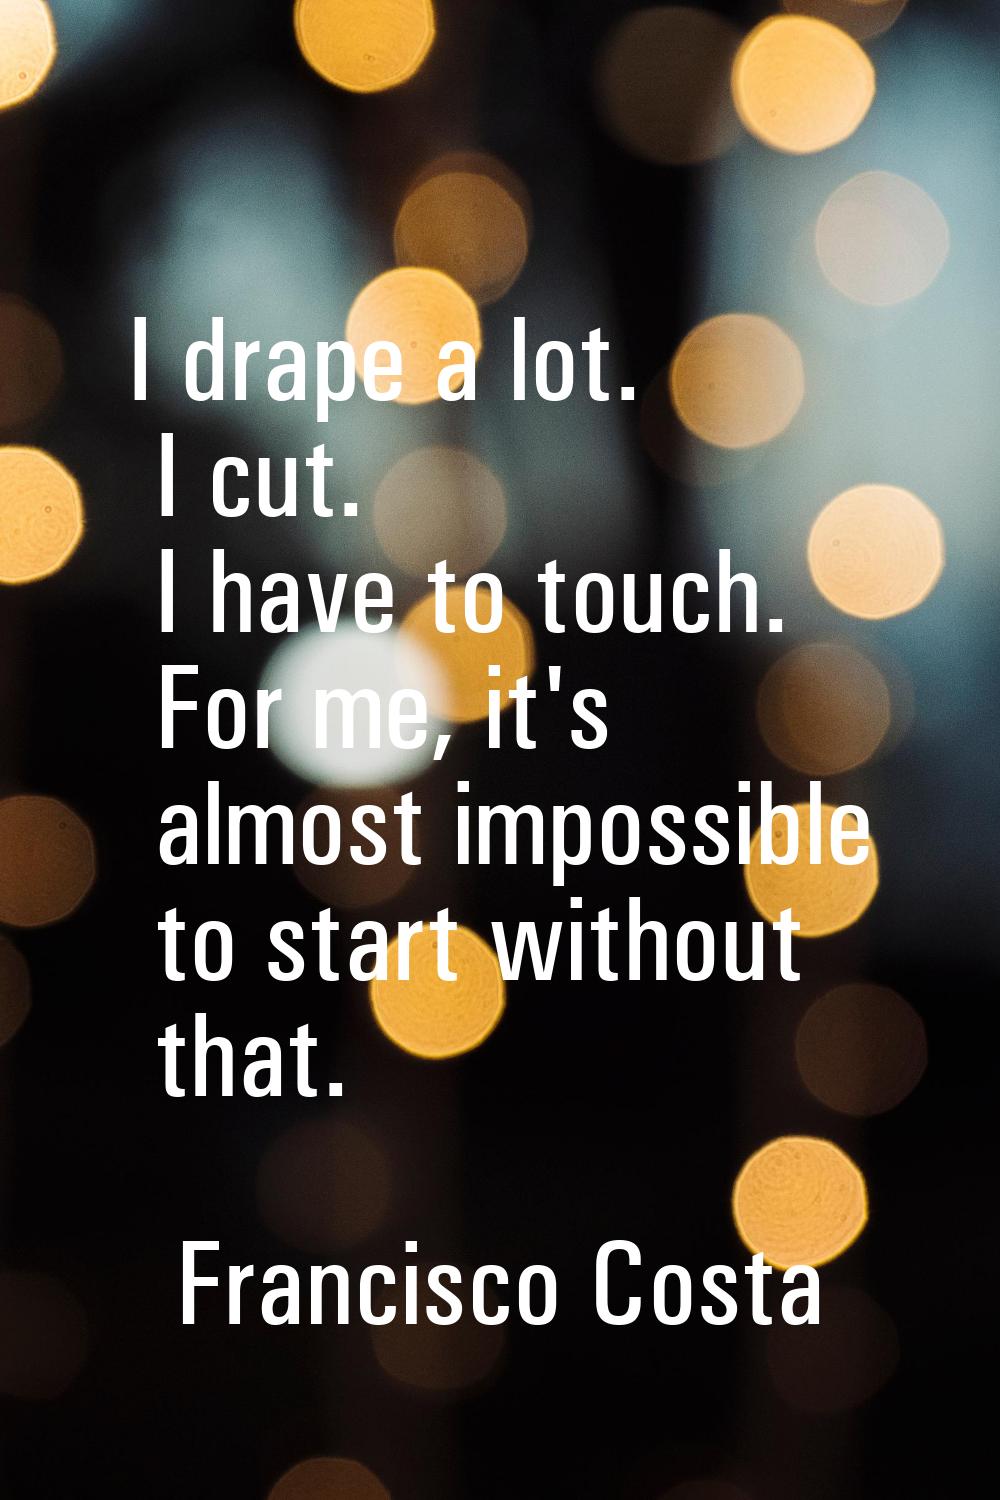 I drape a lot. I cut. I have to touch. For me, it's almost impossible to start without that.